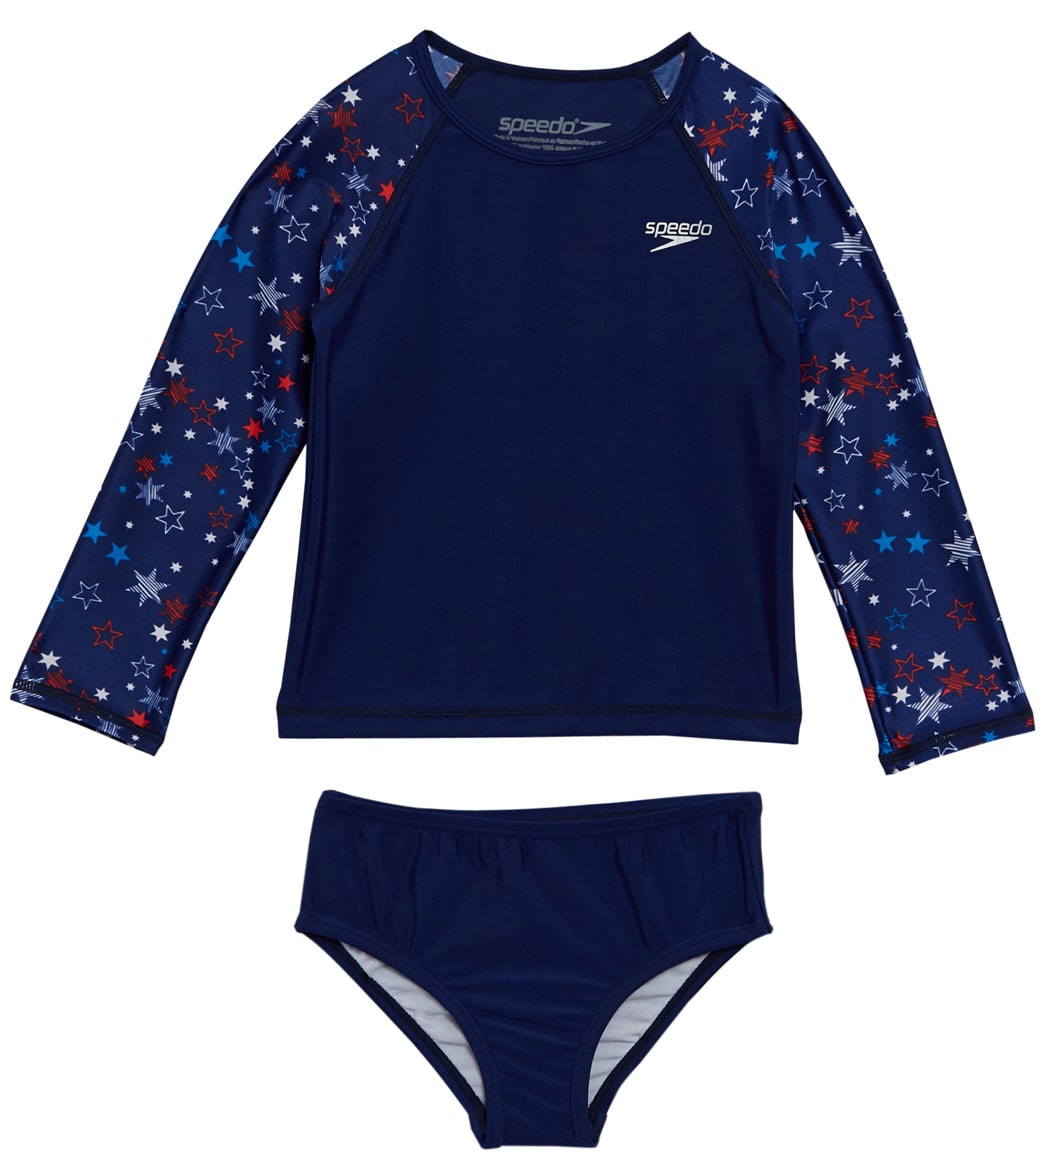 Speedo Girls' Long Sleeve Two Piece Rashguard Set Baby - Red/White/Blue 12 Months Baby - Swimoutlet.com